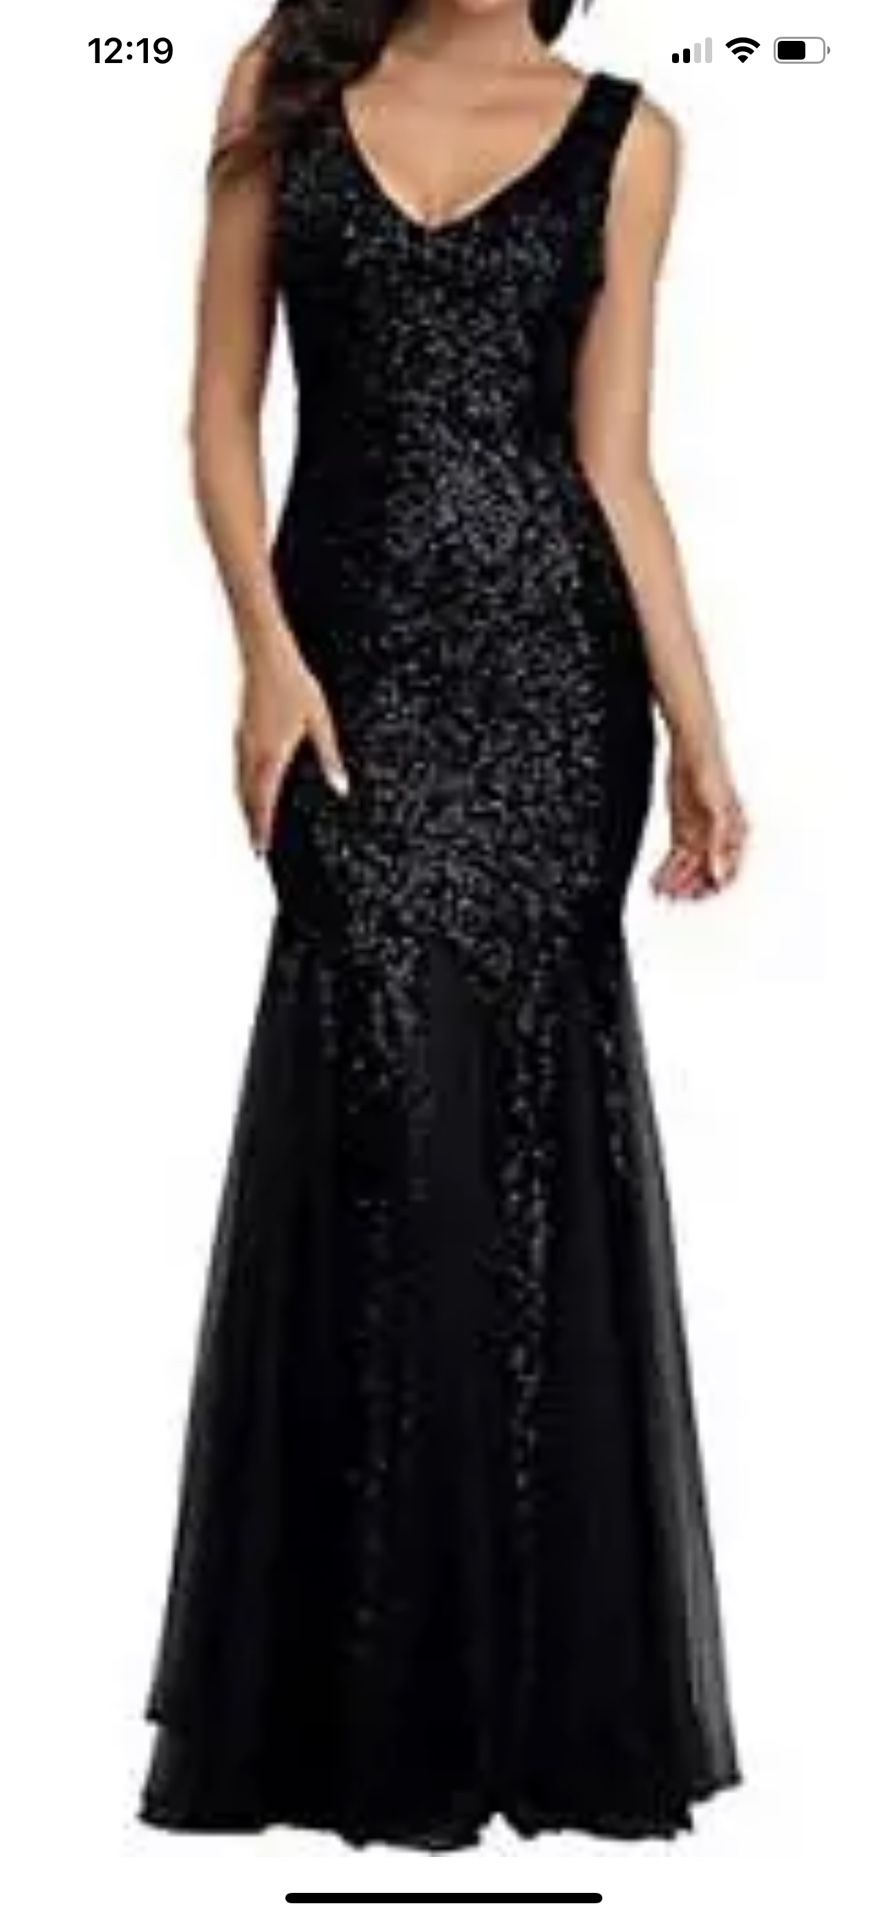 New Black Sequin Party Prom Formal Dress  M or L